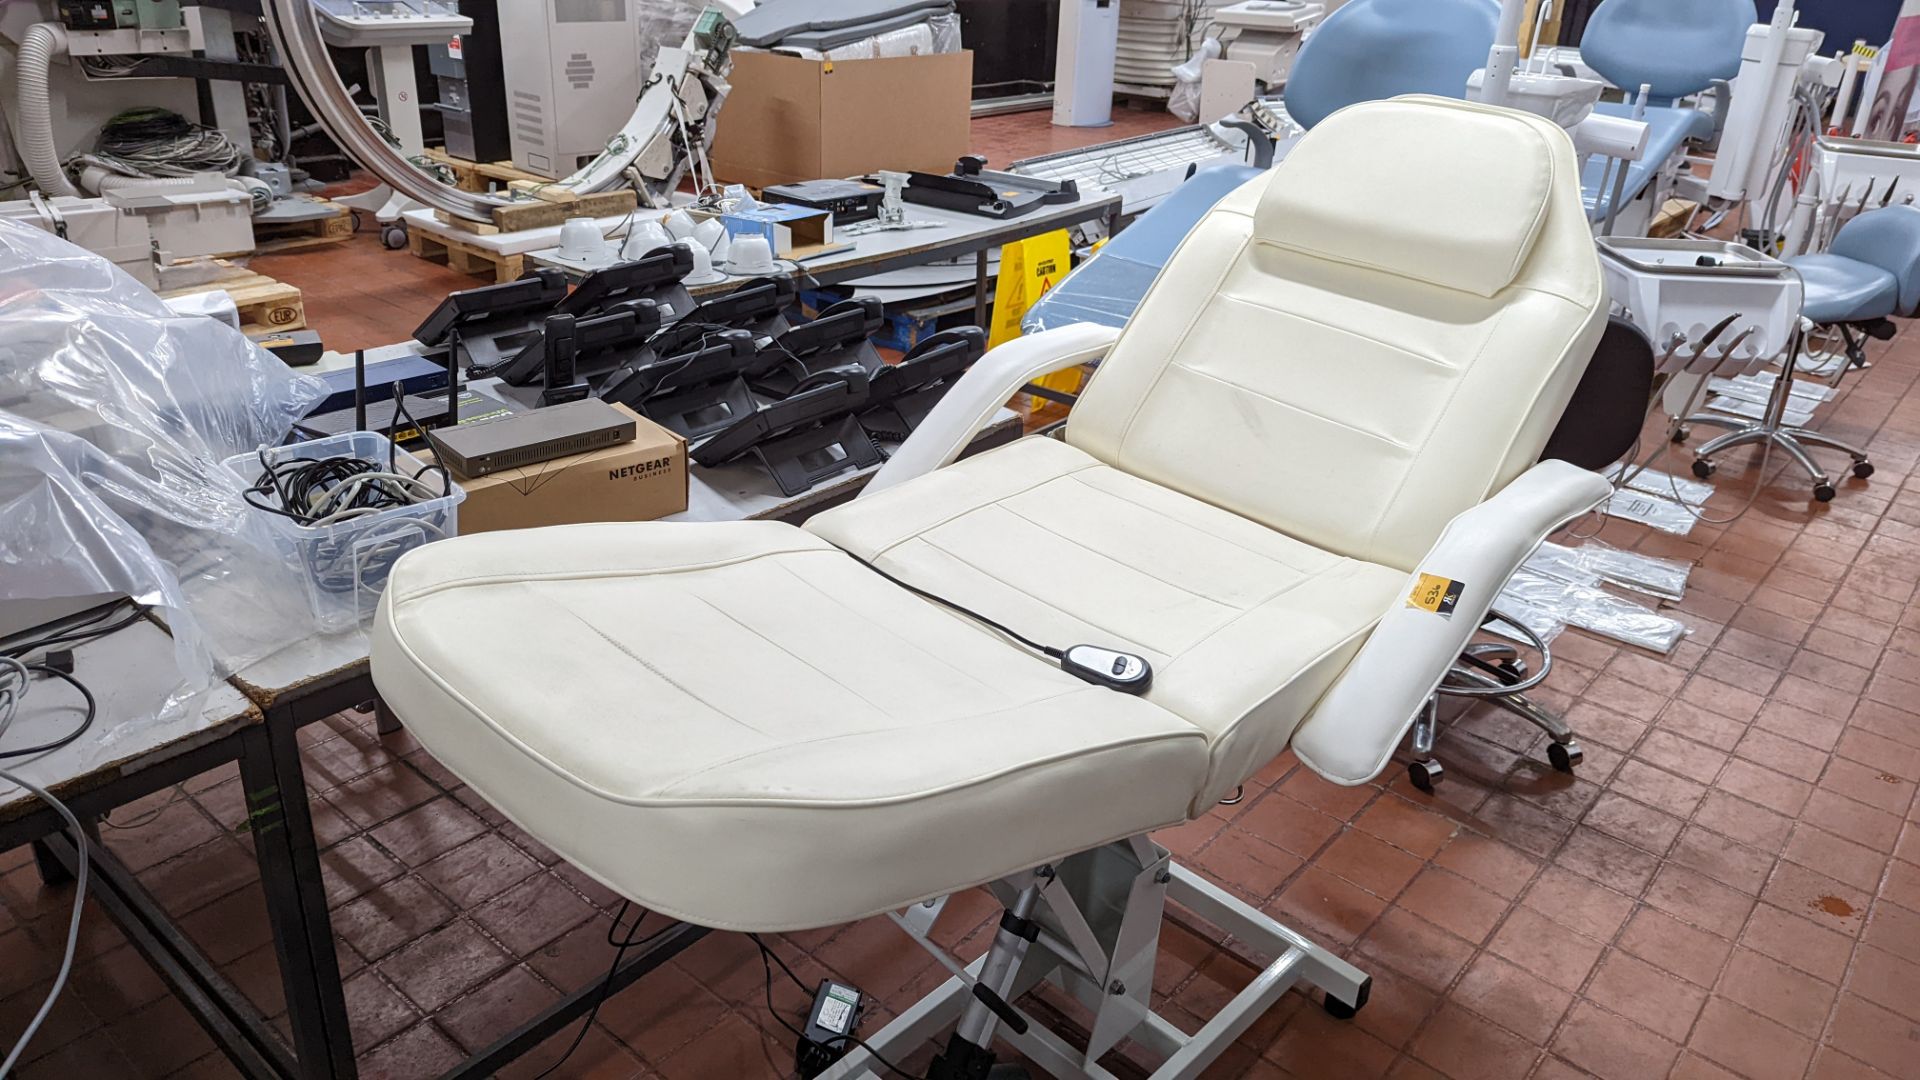 Electrically adjustable patient bed with hand-held controller